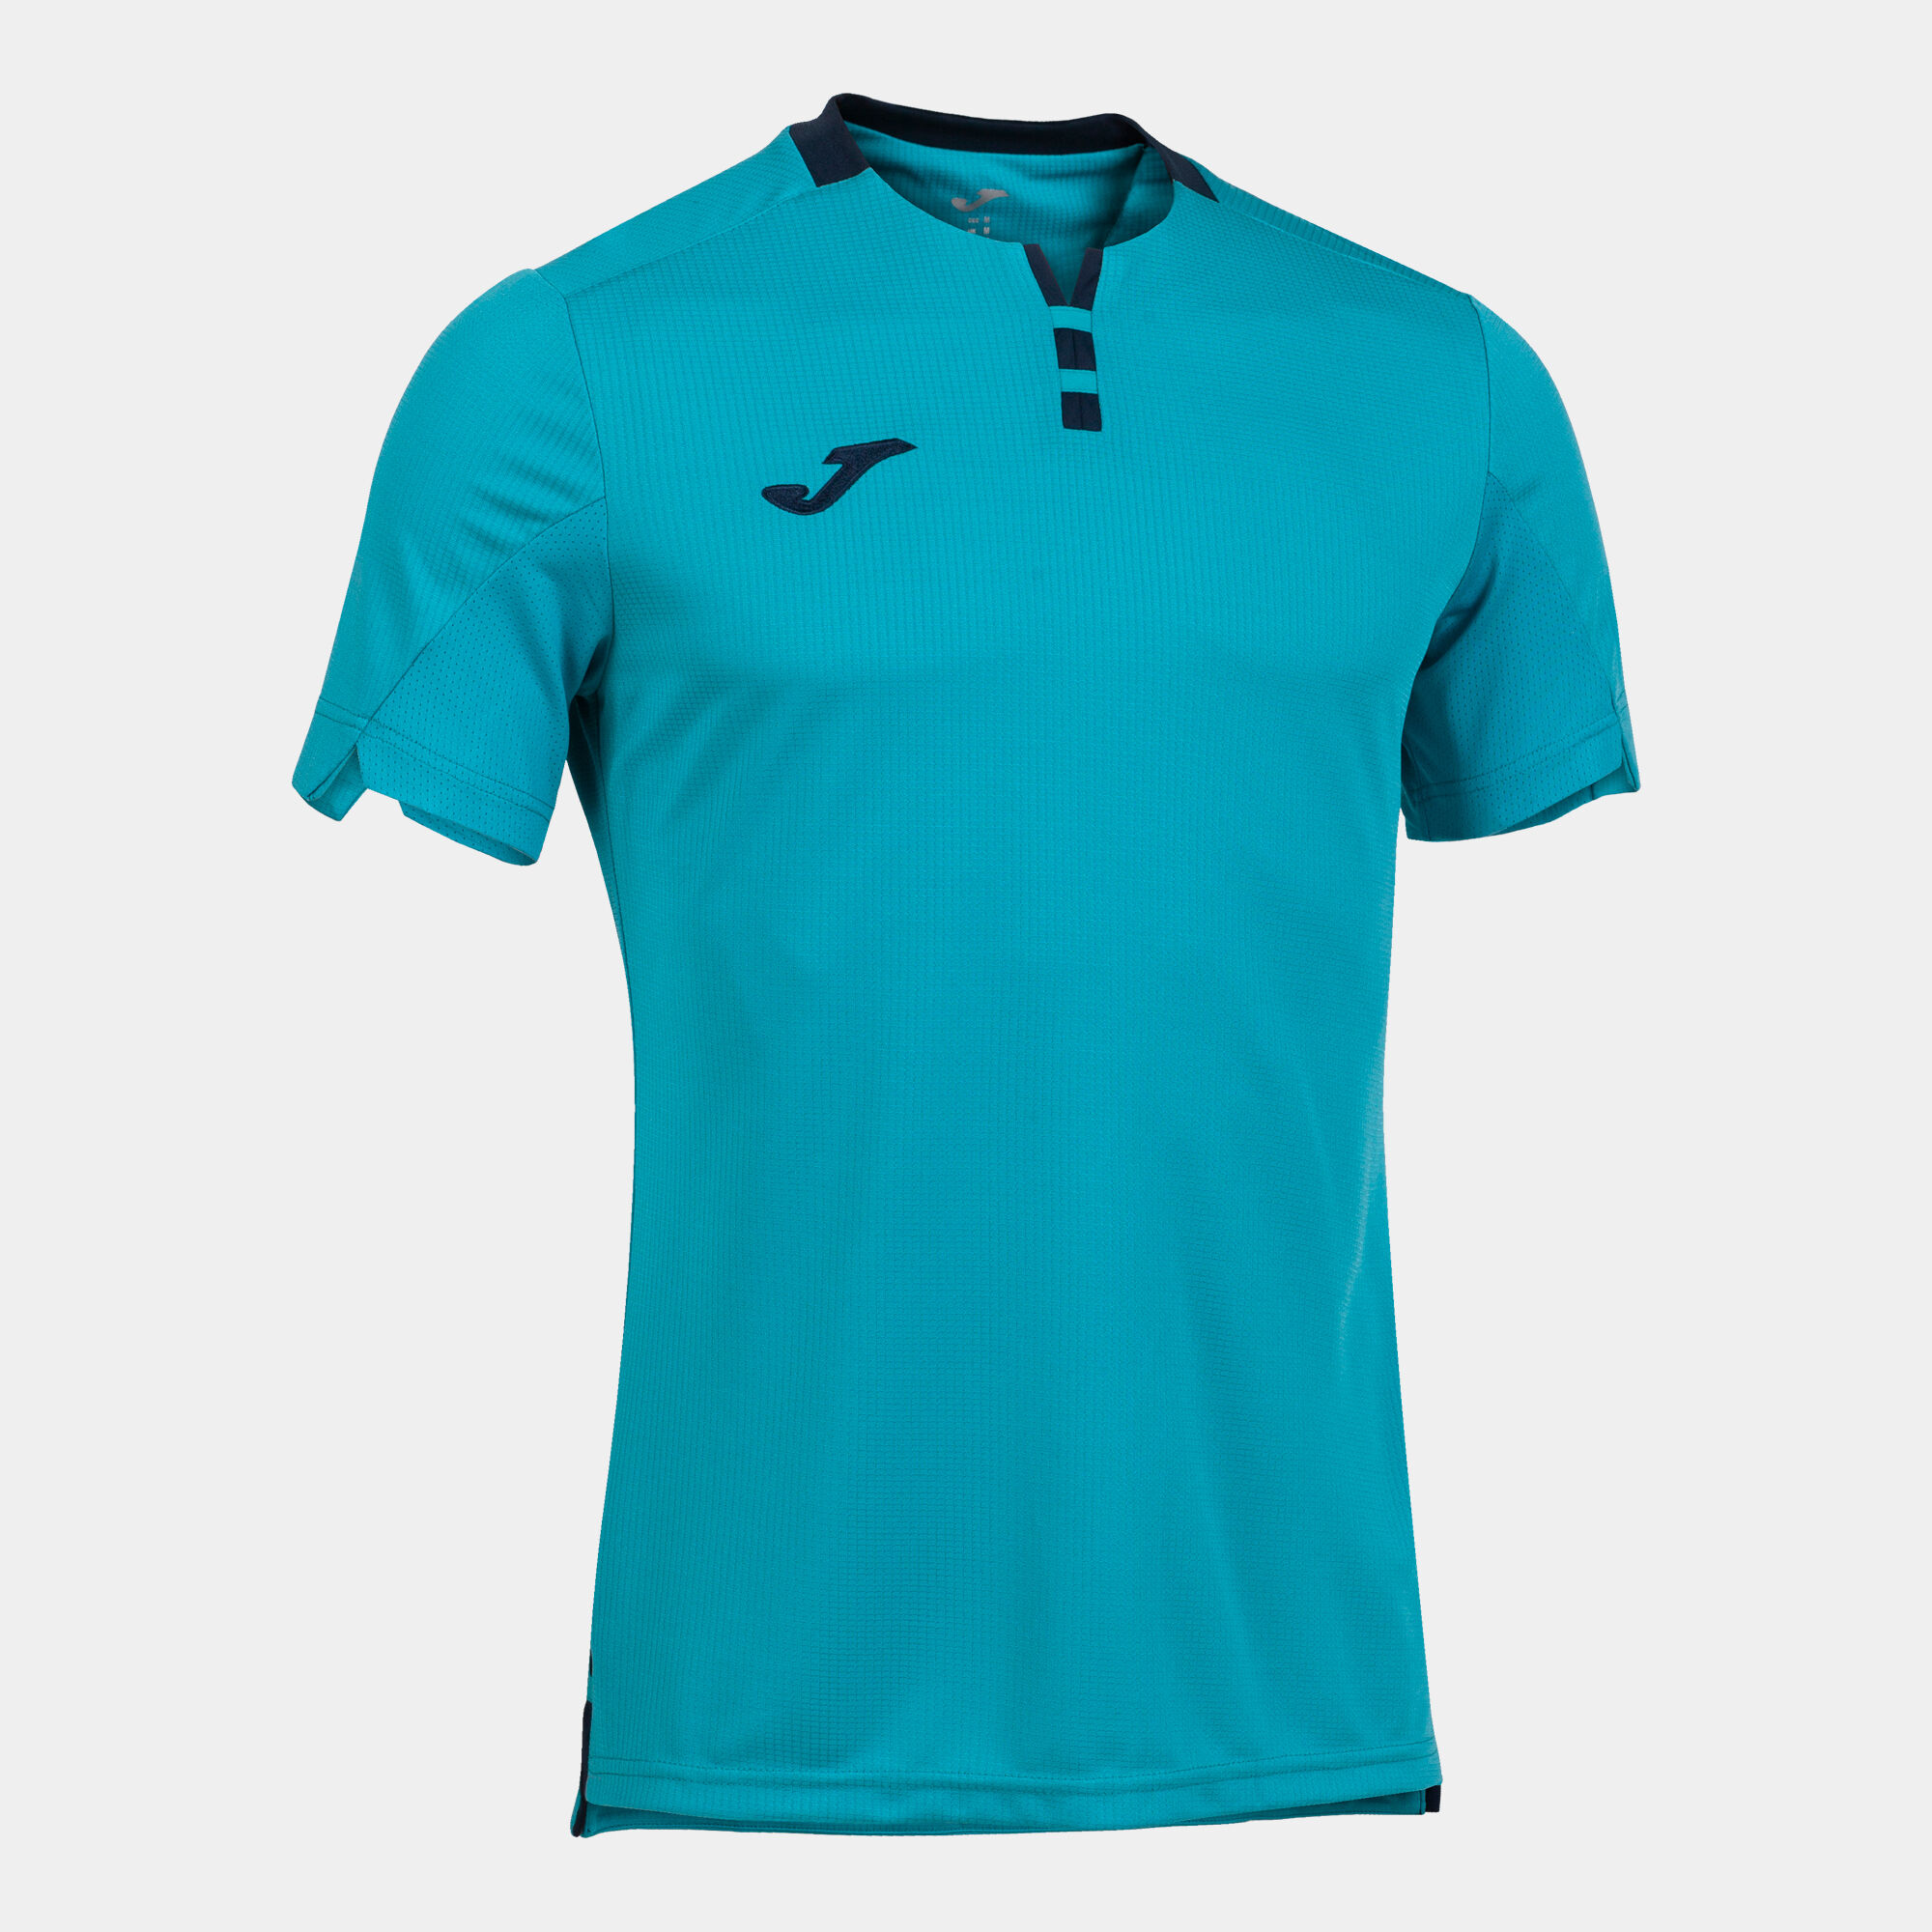 MAILLOT MANCHES COURTES HOMME GOLD IV TURQUOISE FLUO BLEU MARINE